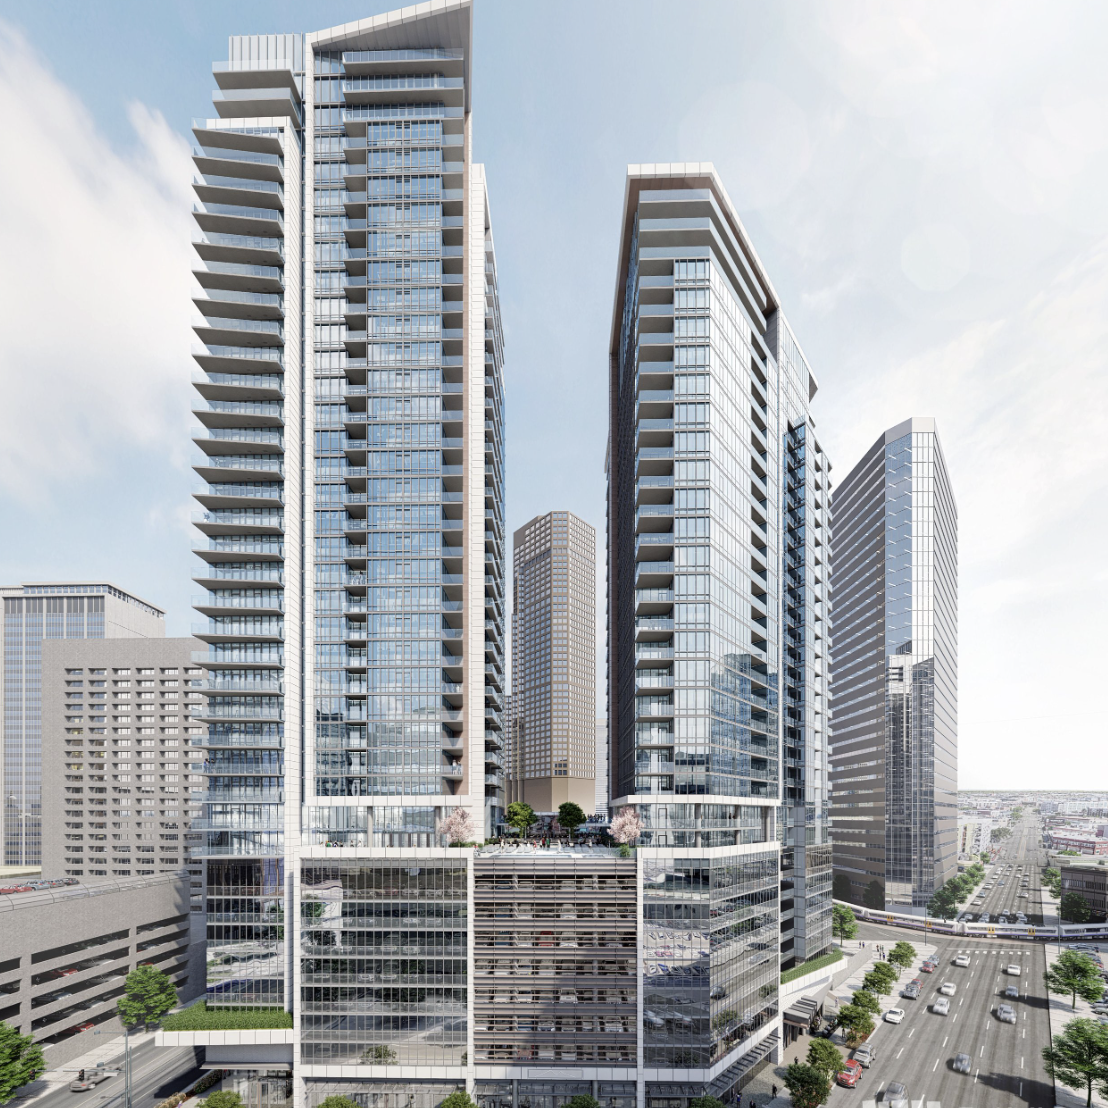 West + Main Homes to Oversee Sales for Amacon’s Condo Project in Downtown Denver